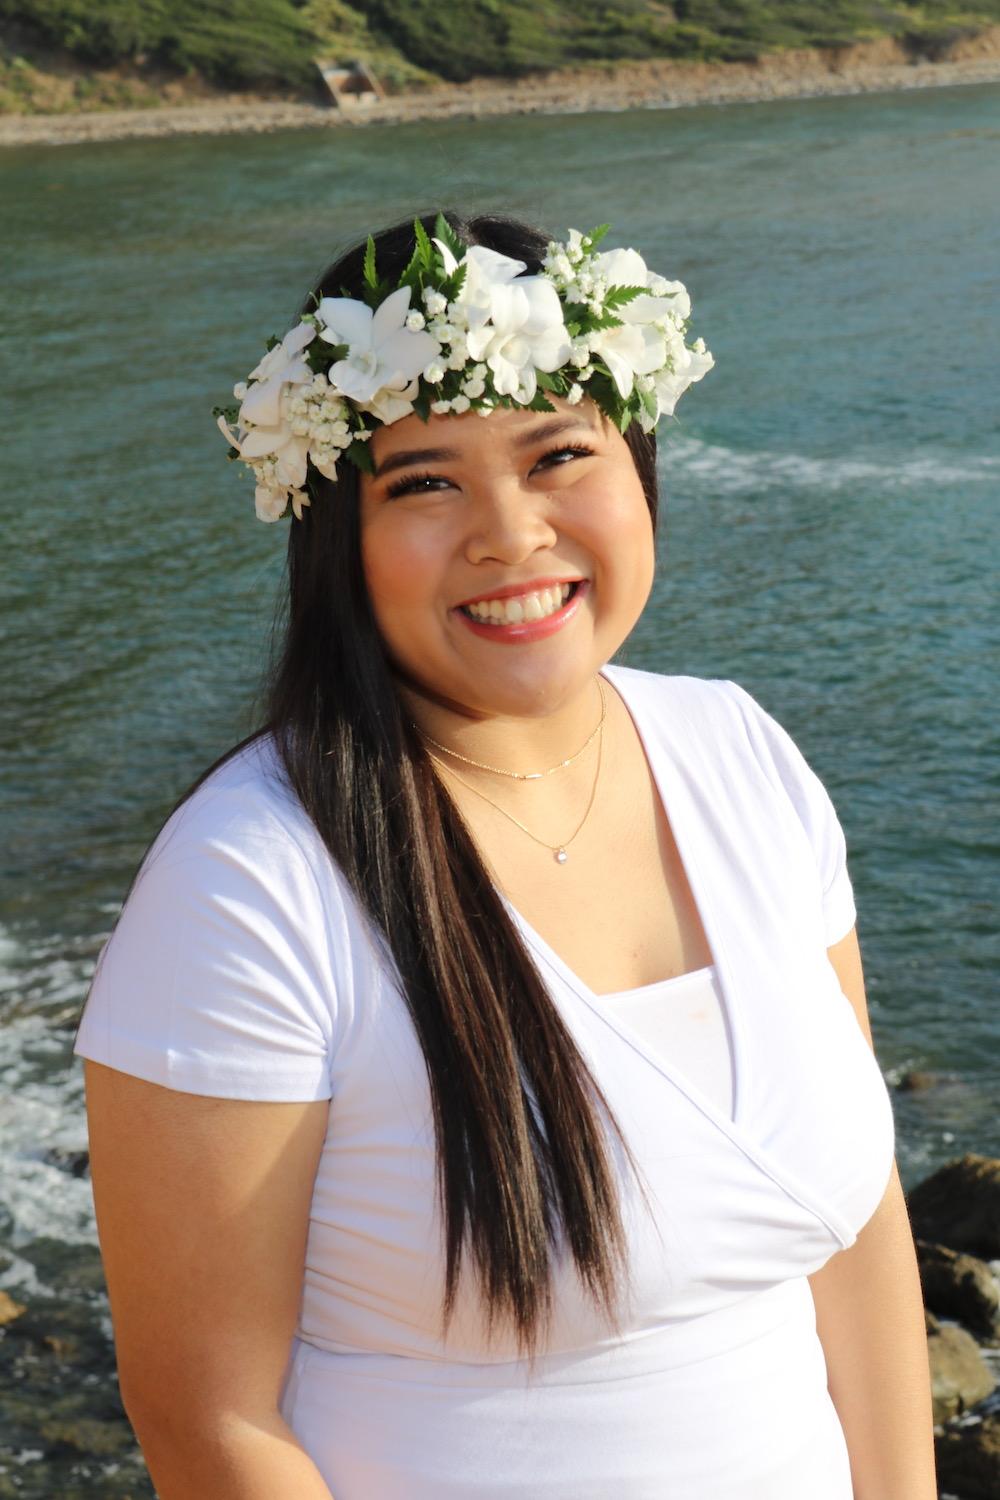 Kiaaina wears a white haku lei, a Hawai'ian flower crown worn in times of celebration, in Palos Verdes, CA, in June. Kiaaina said her aunt sent her the lei from Hawai'i, and even though her graduation ceremony was canceled, Kiaaina still wanted to celebrate by embracing her culture.